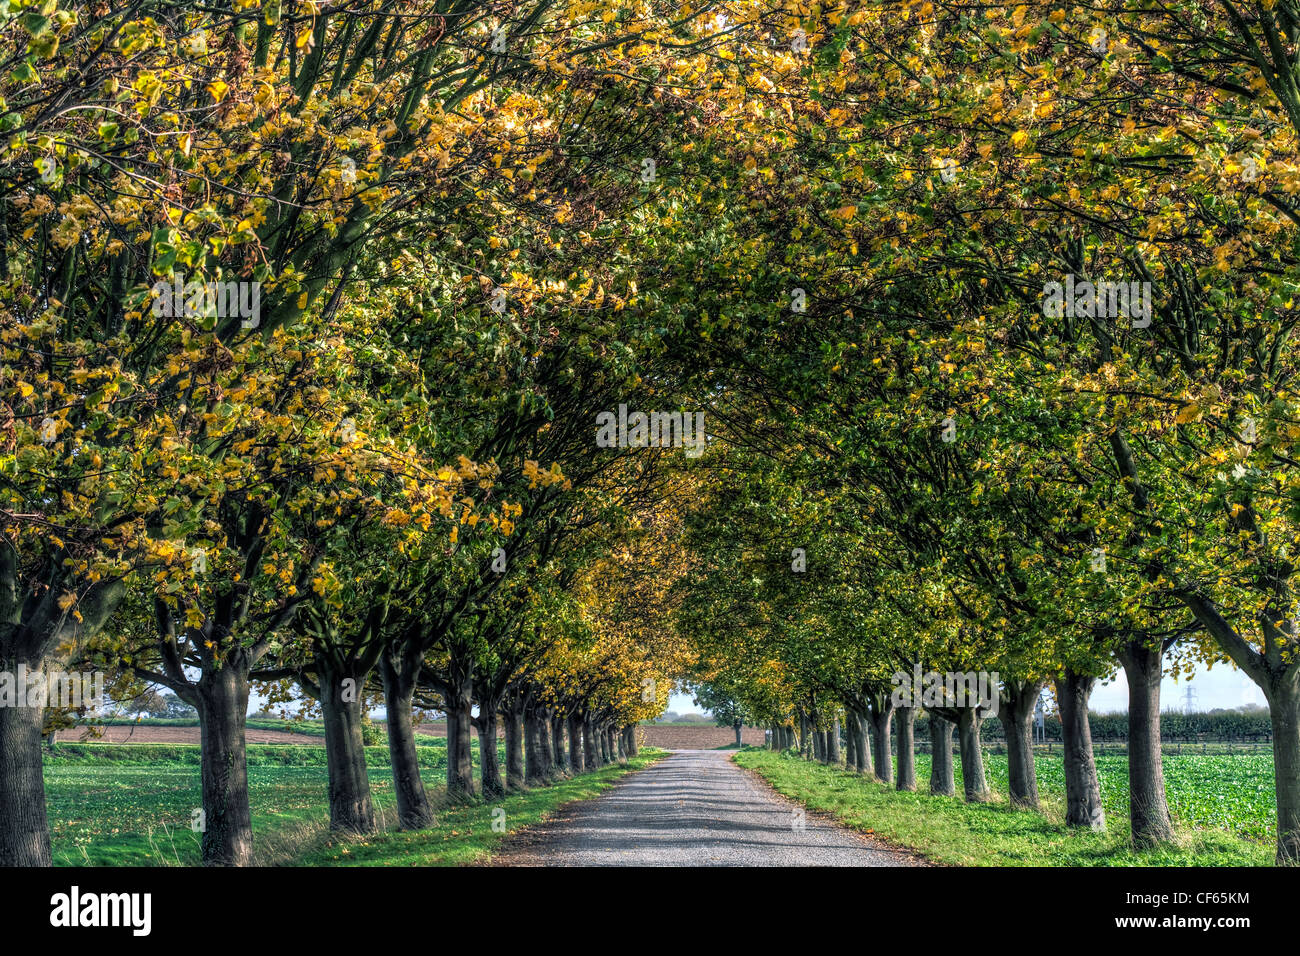 Autumnal leaves on trees lining a single track road. Stock Photo